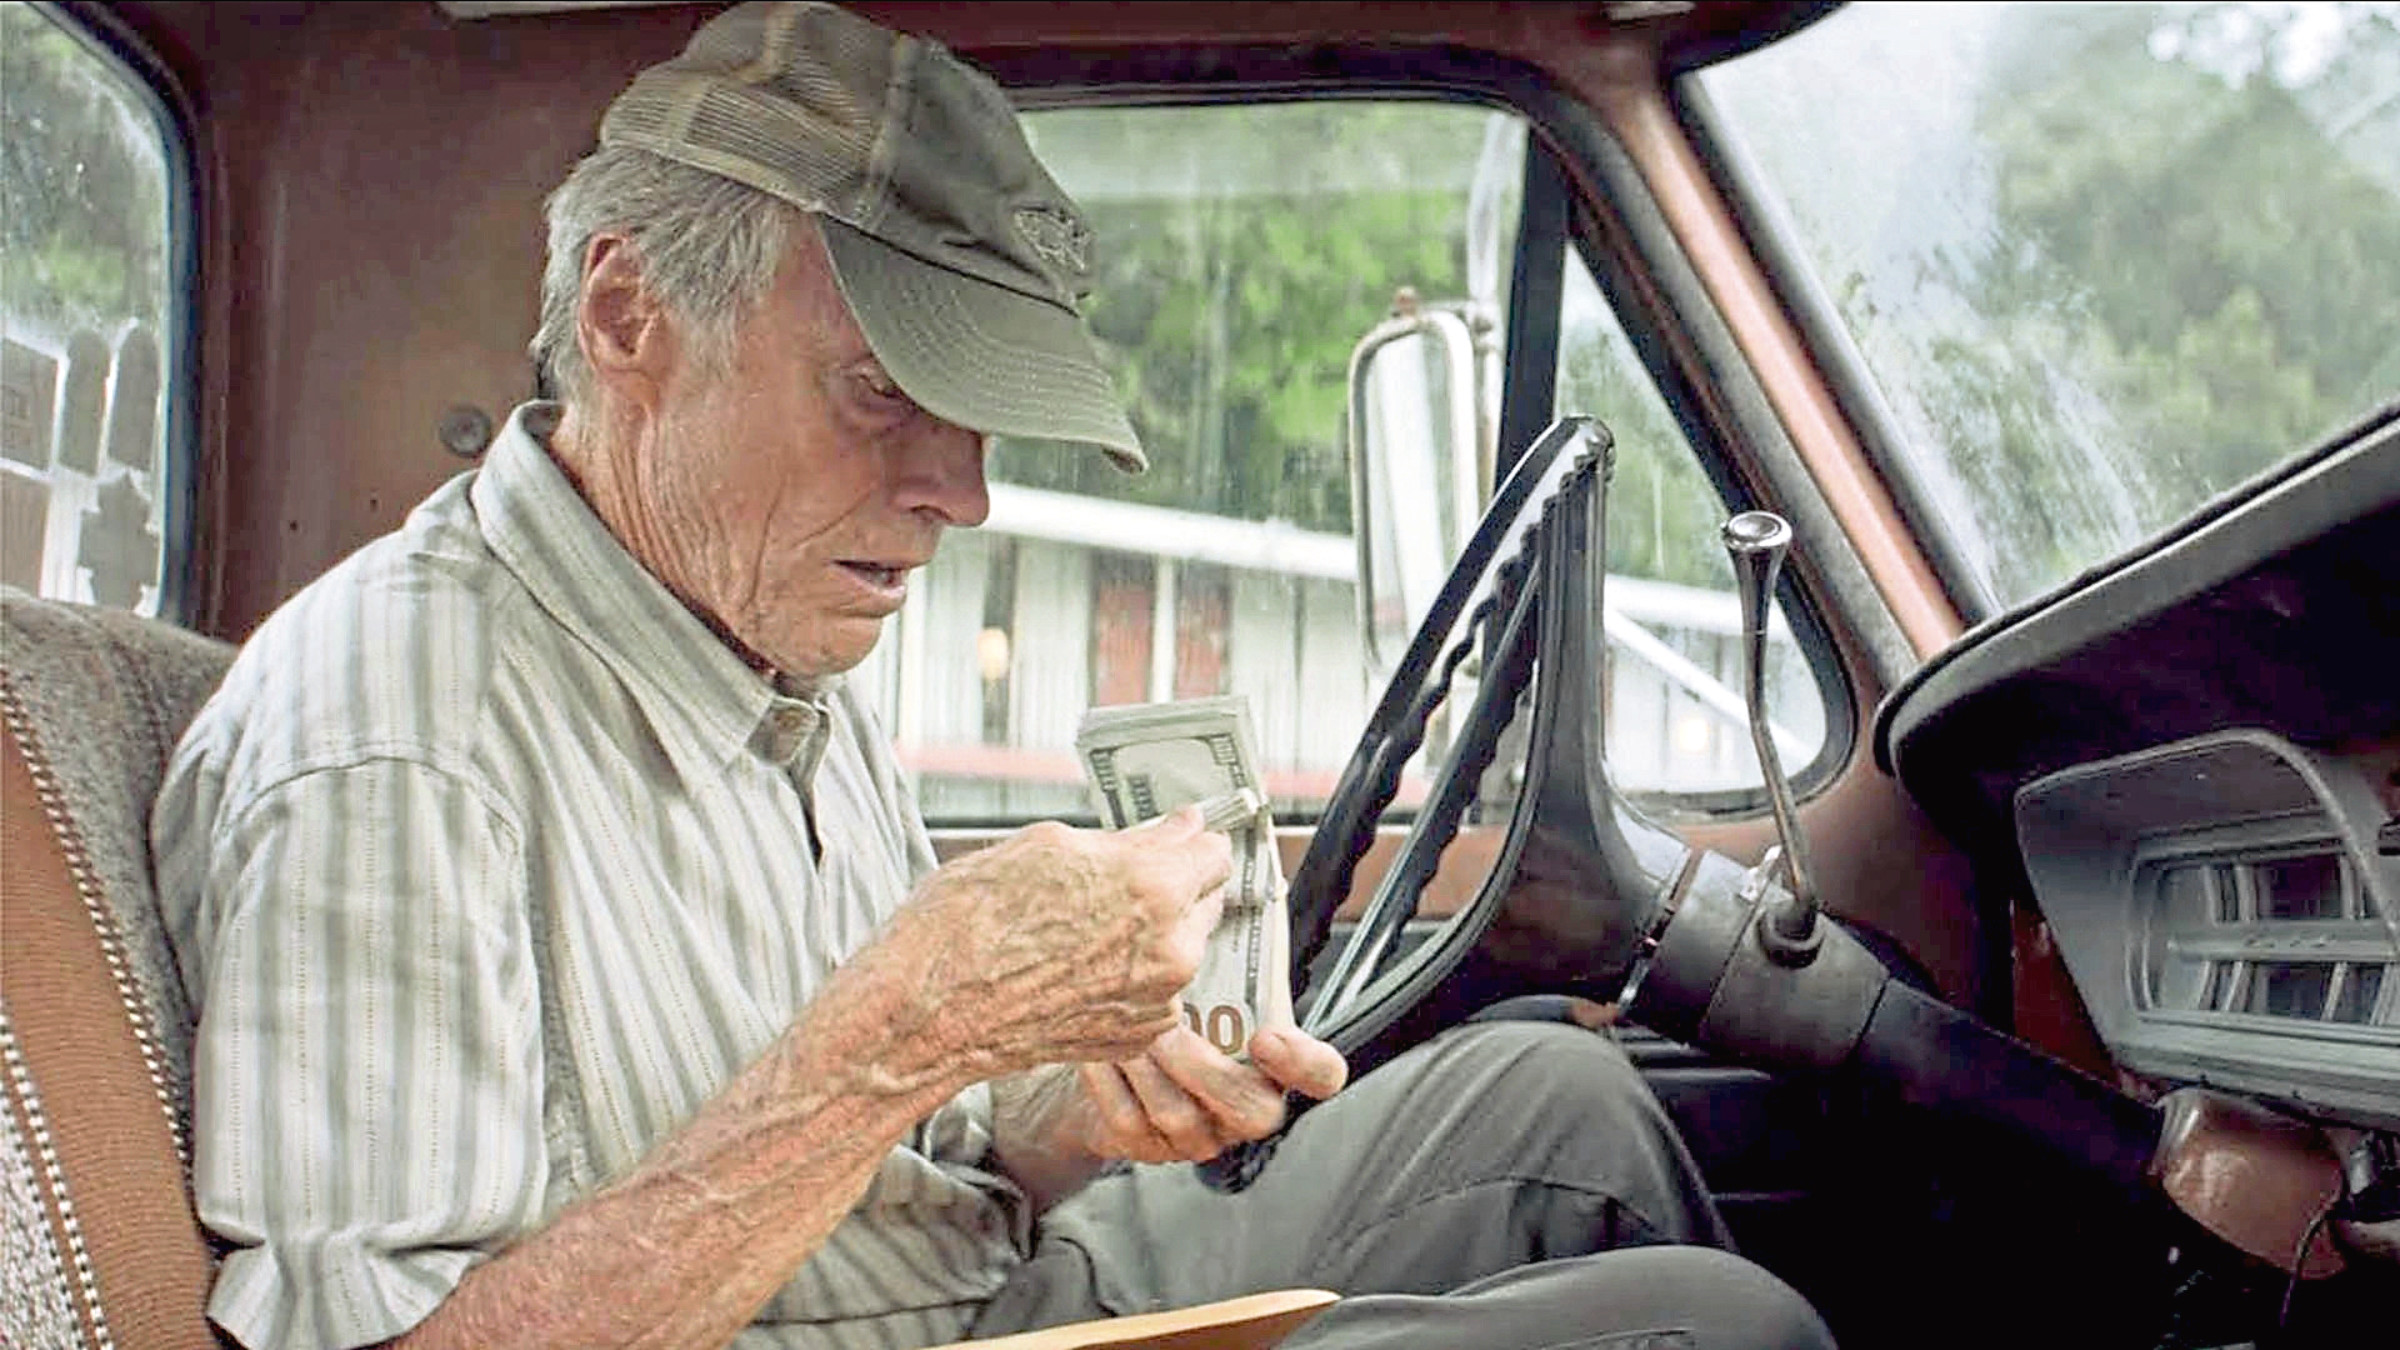 In cinemas this week: Clint Eastwood's masterful The Mule - The Sunday Post